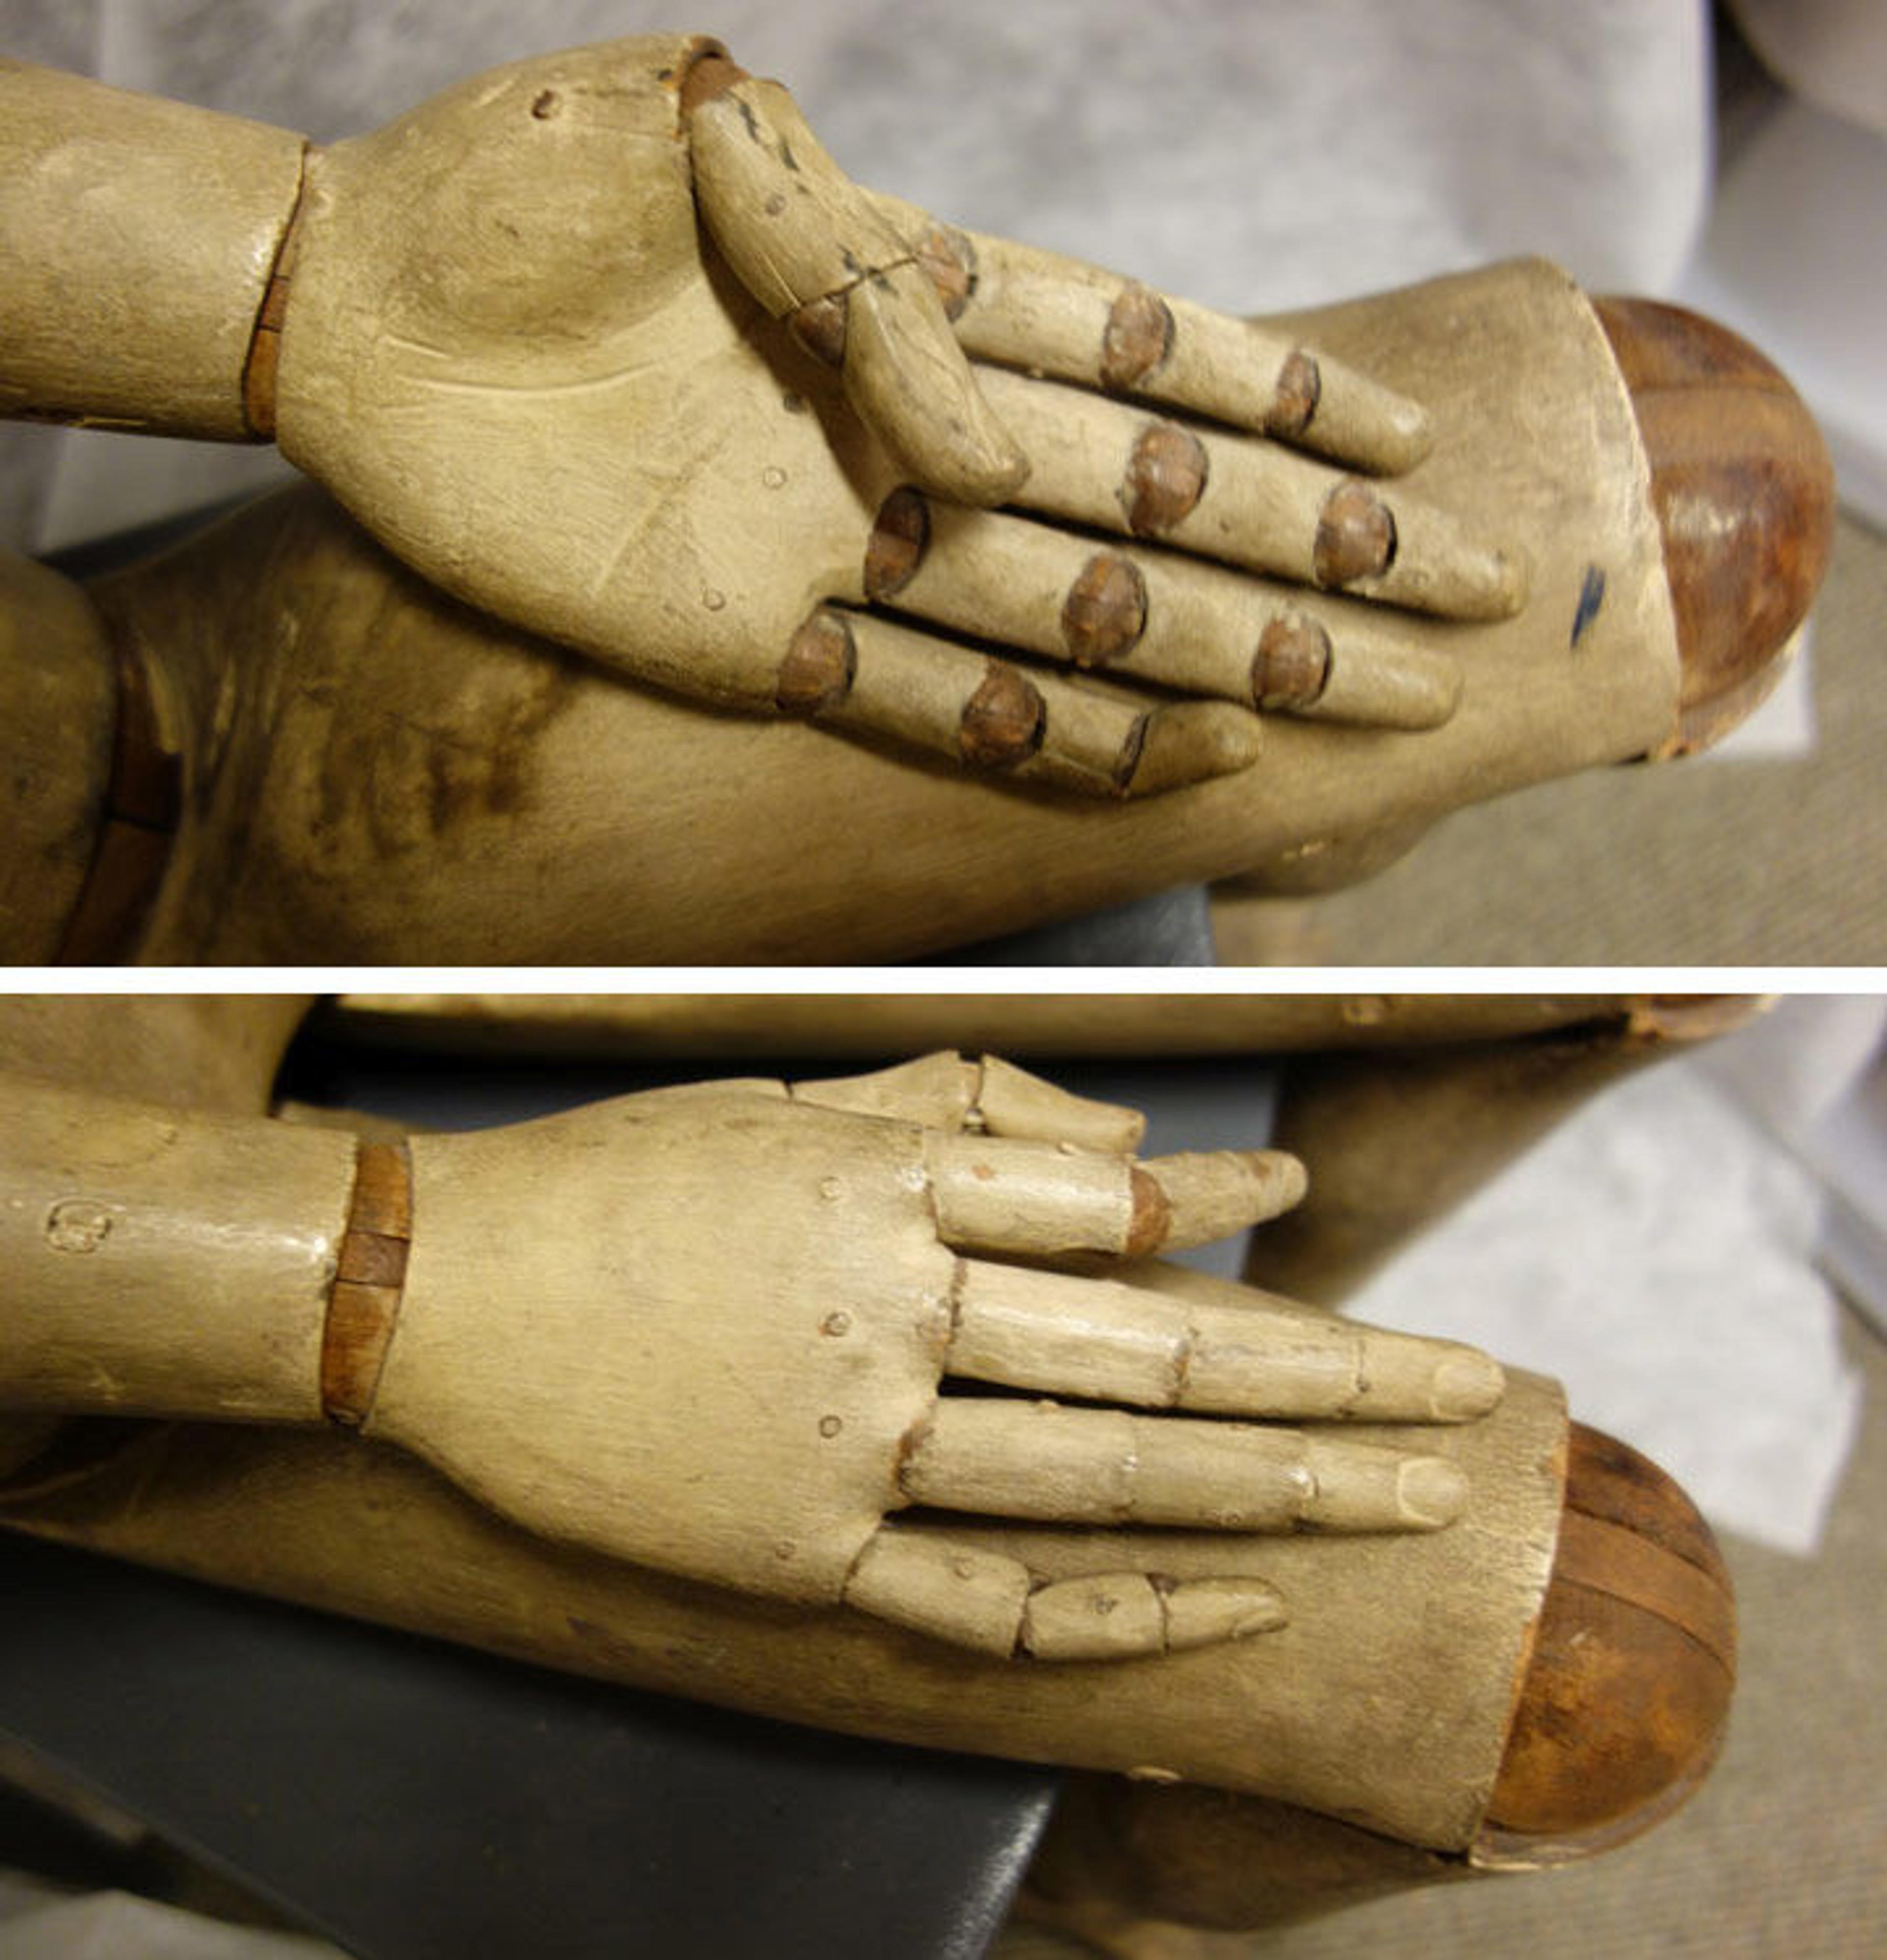 Two detail views of the mannequin, showing its left hand with palm-side up, and the other showing the object's right hand, palm-side down, resting on top of the mannequin's right leg